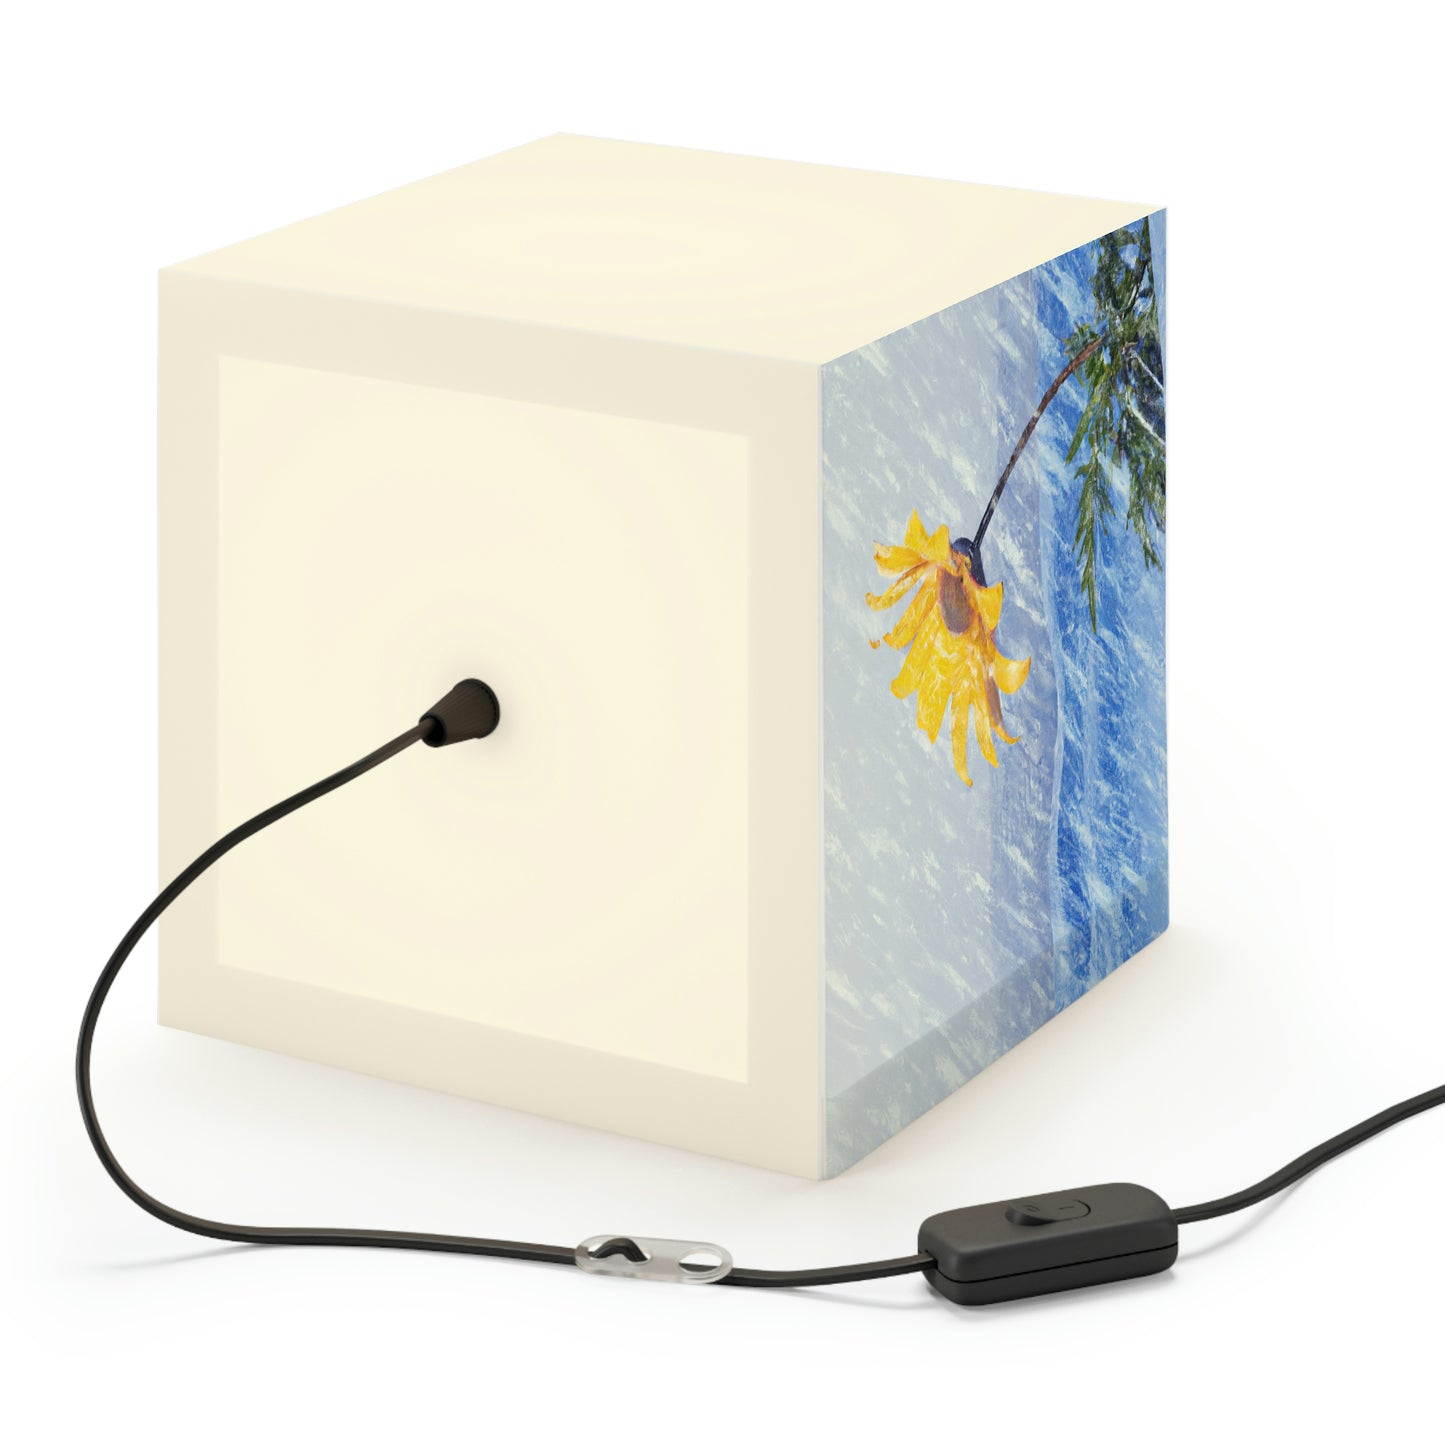 "A Burst of Color in the Glistening White: The Miracle of a Flower Blooms in a Snowstorm" - The Alien Light Cube Lamp